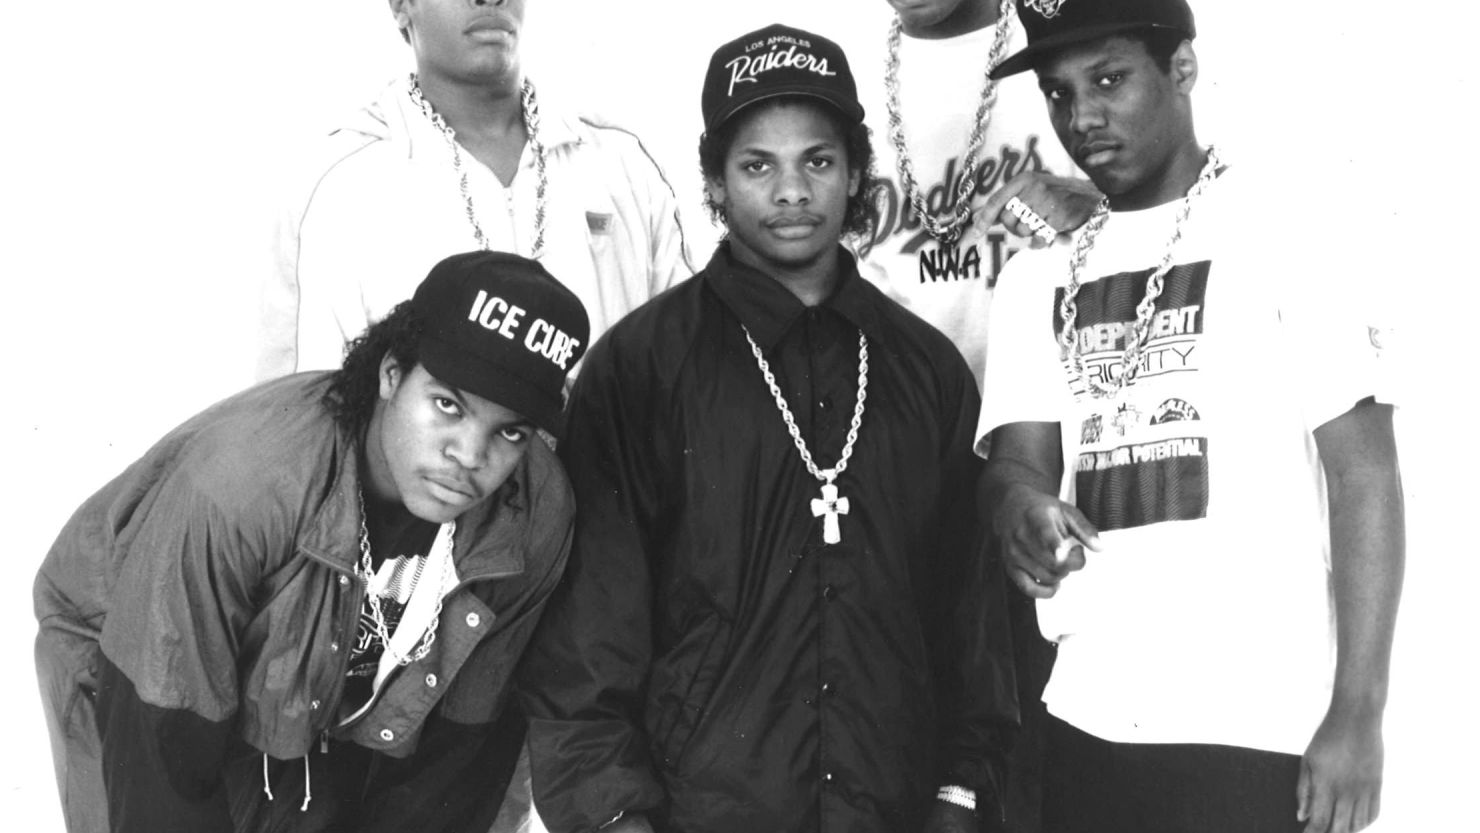 Rap group N.W.A. are the subjects of a biopic being released in 2015.